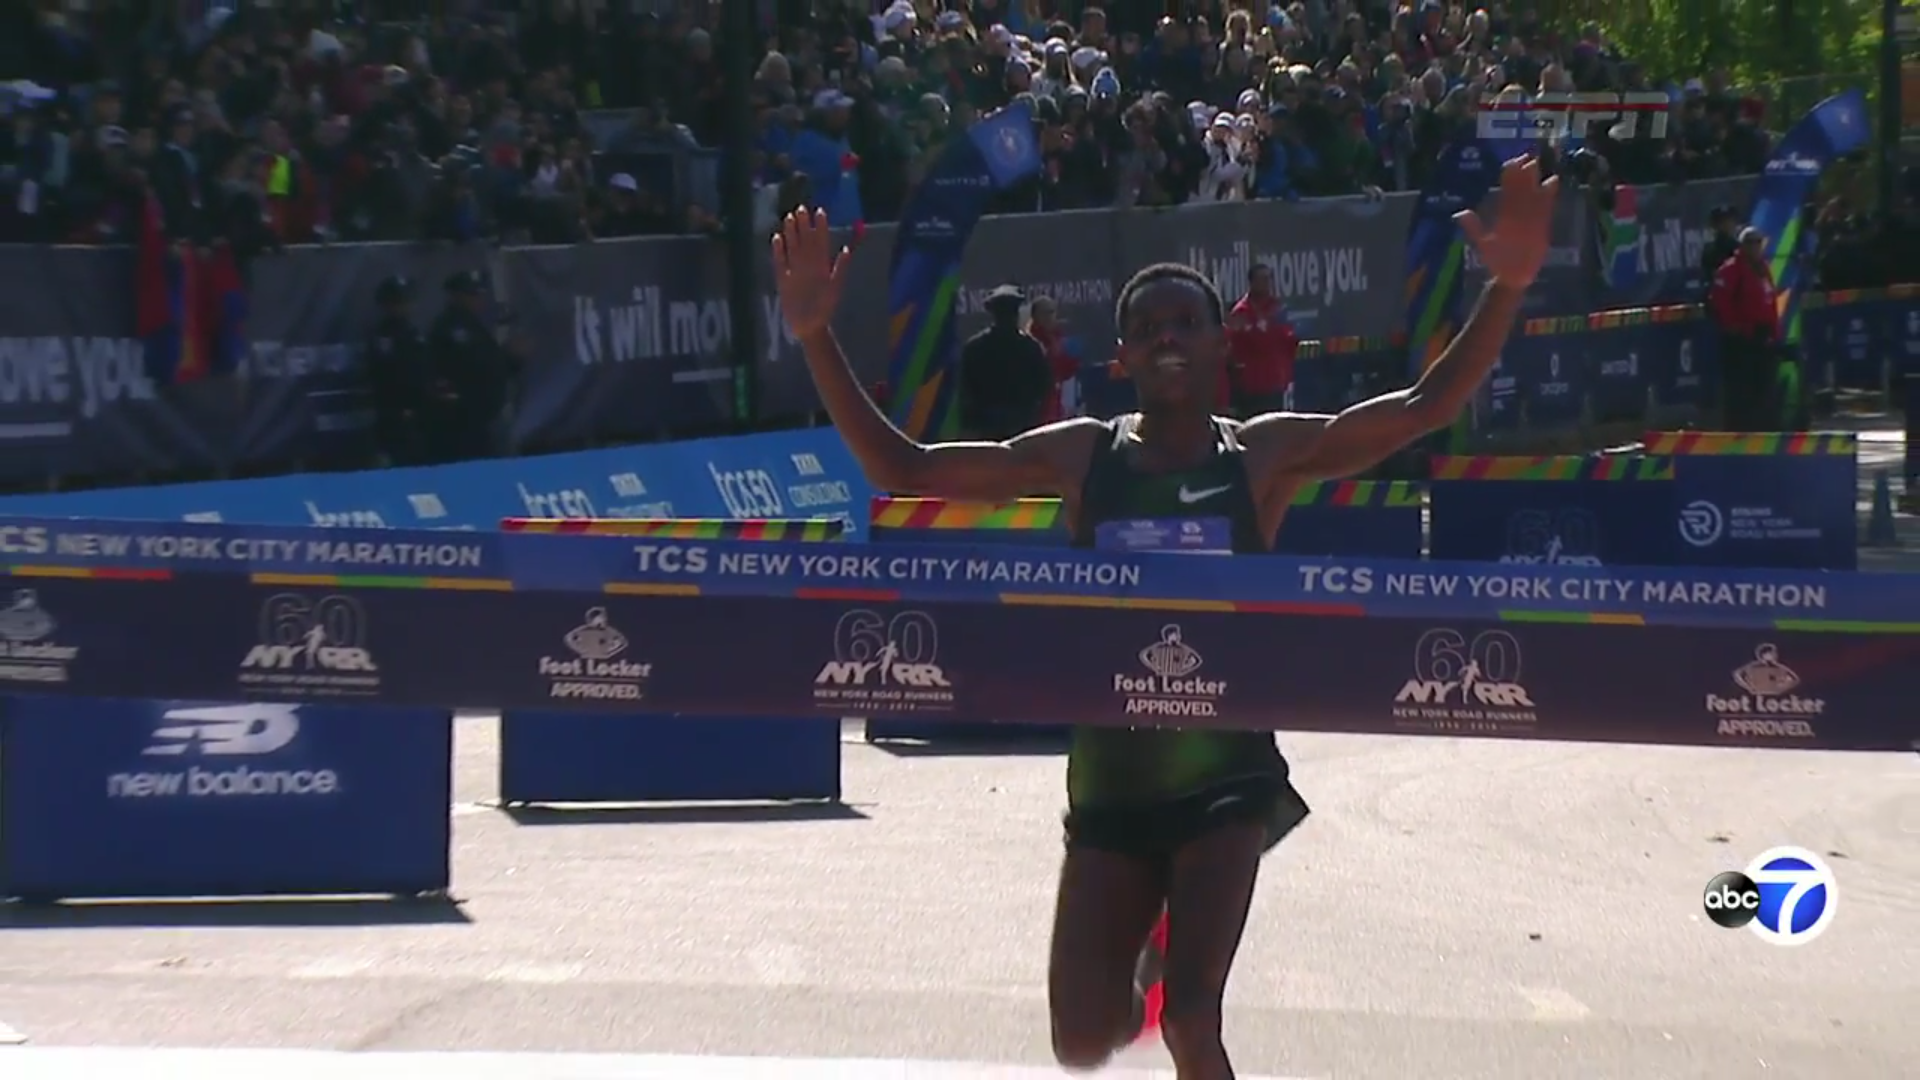 Kenya’s Keitany wins NYC Marathon for 4th time in 5 years